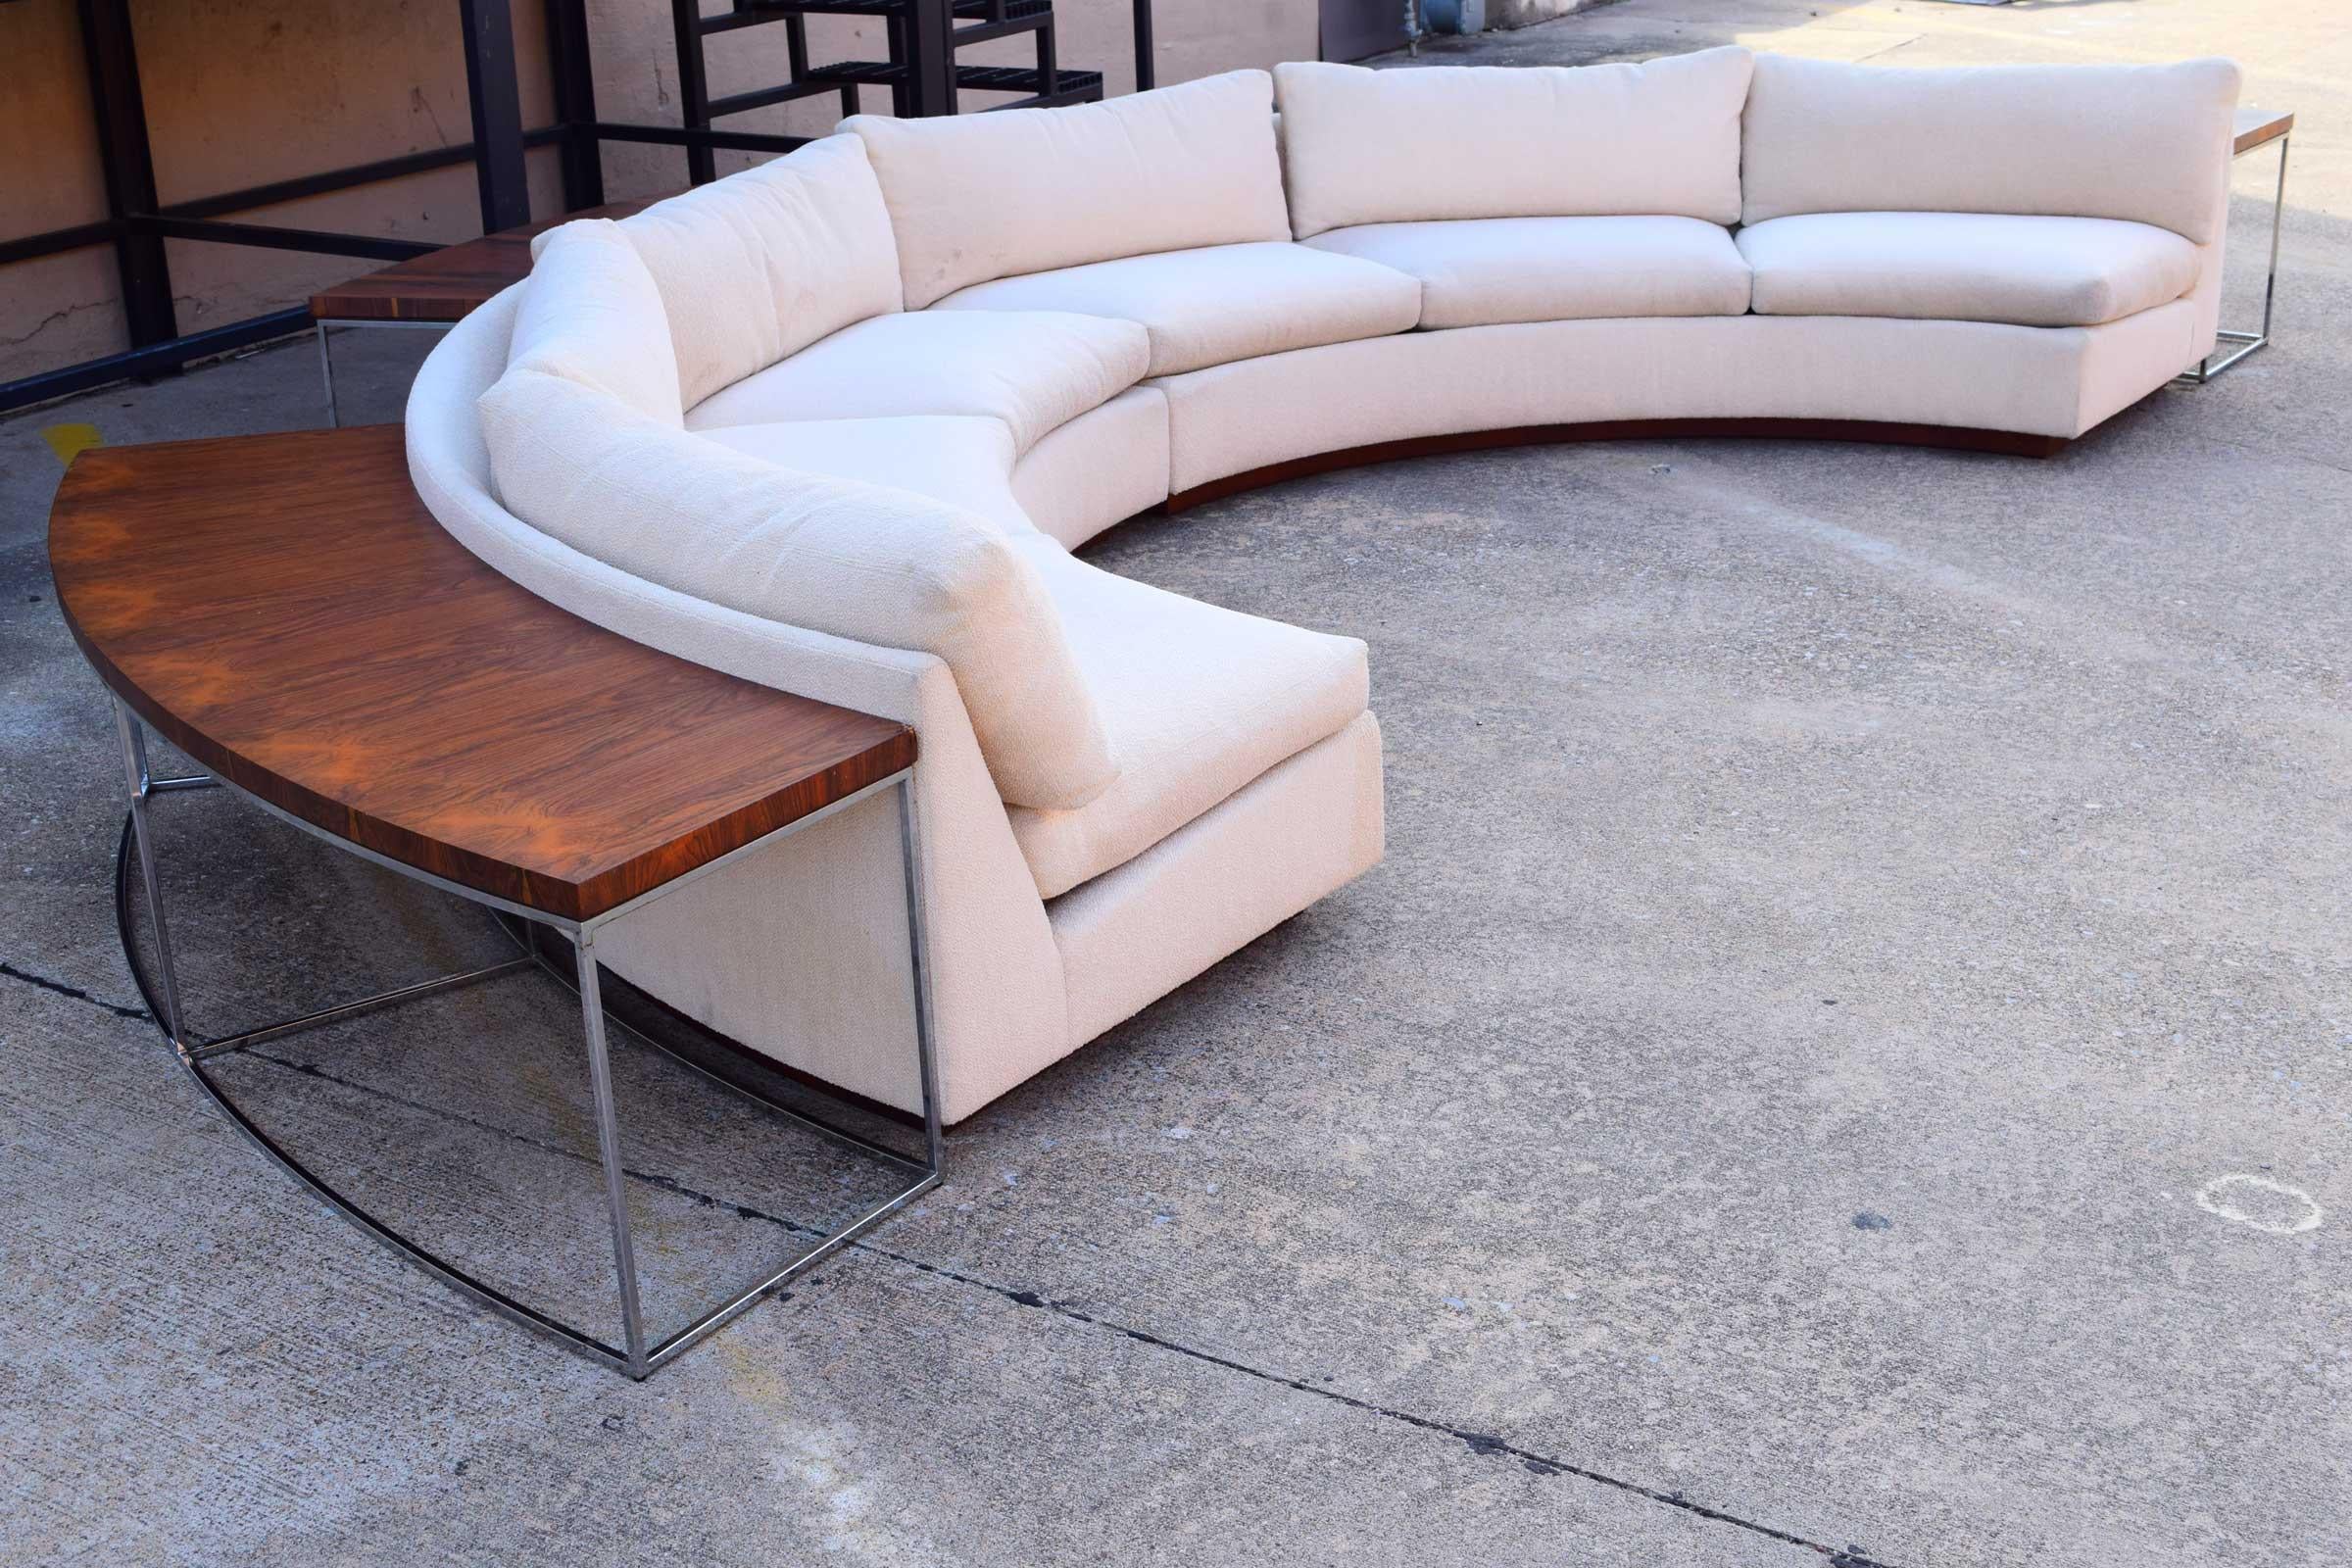 20th Century Milo Baughman Curved Sectional Sofa in Off-White with Rosewood Tables